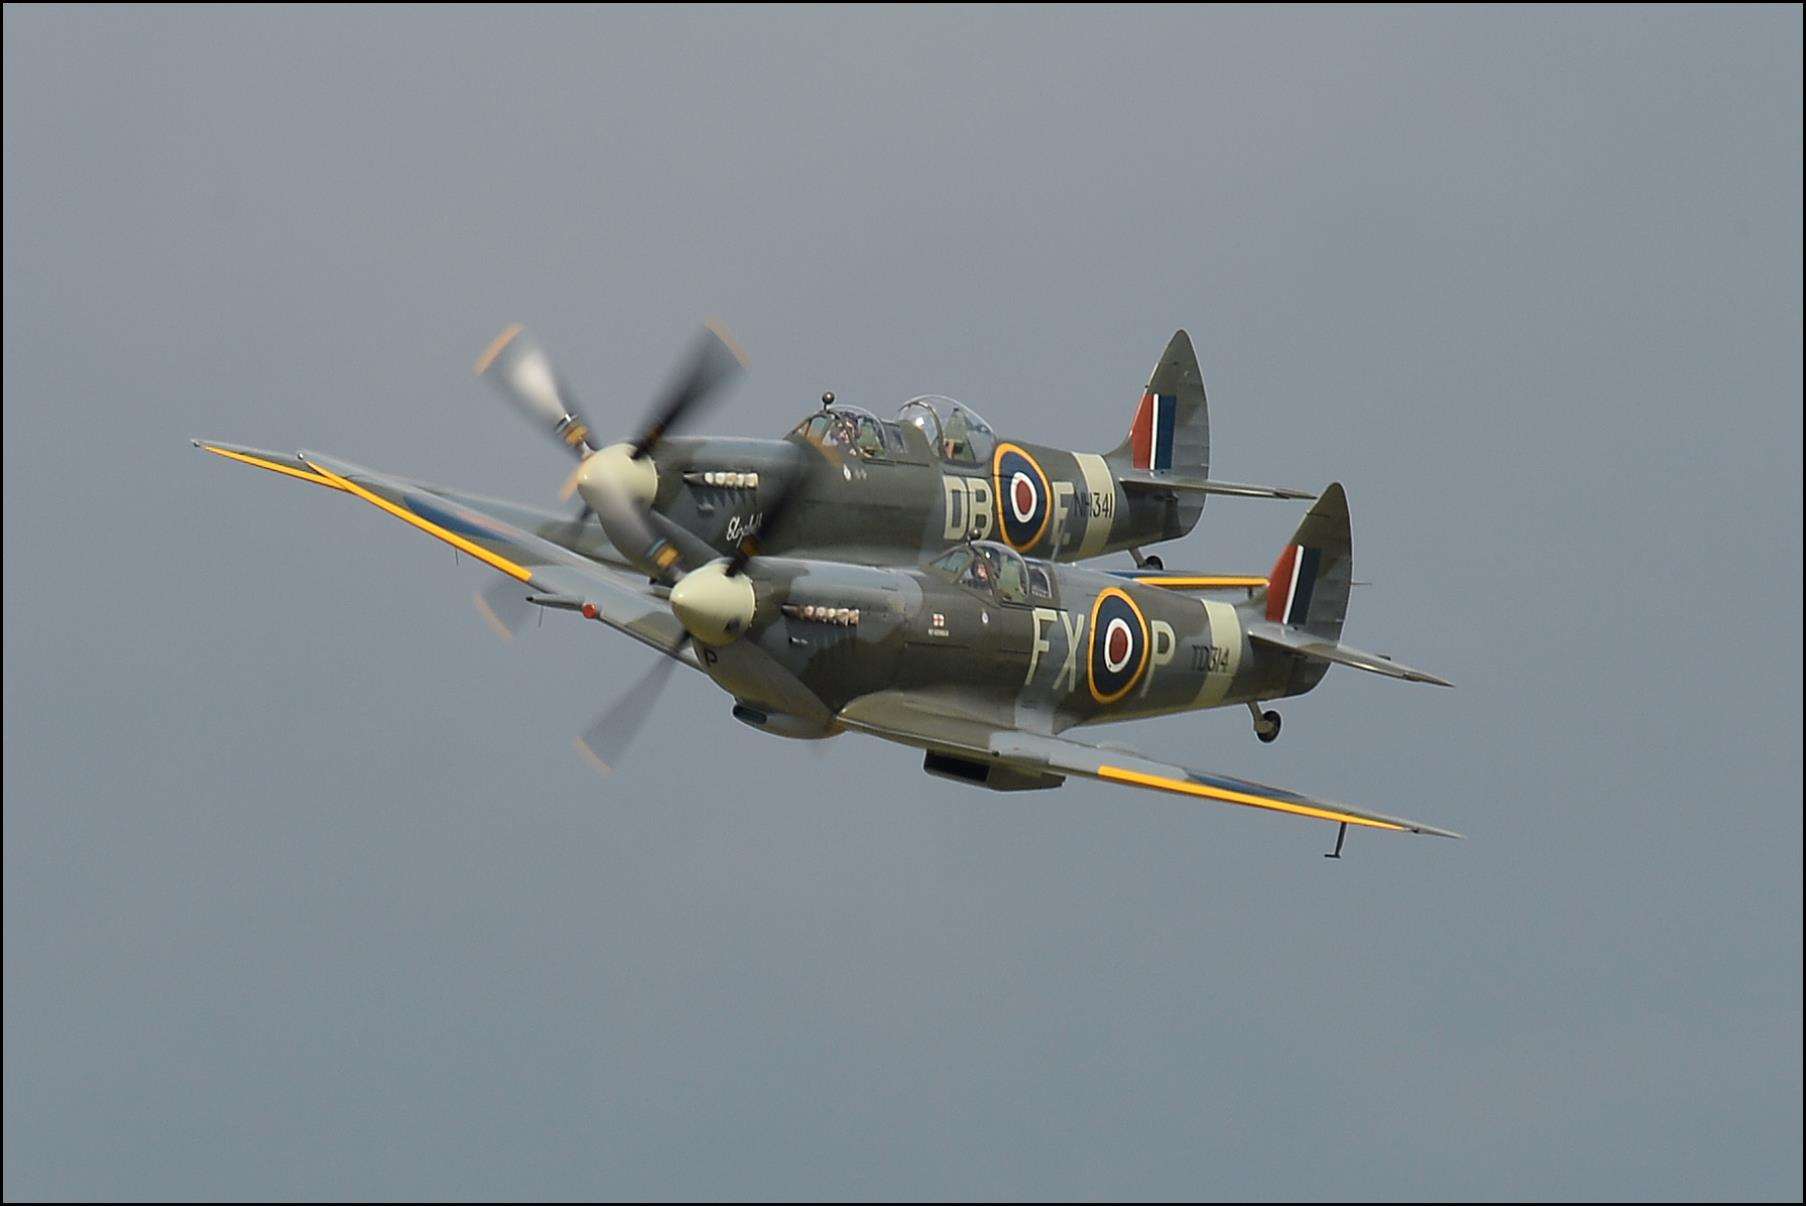 The Battle of Britain Air Show will feature Aero Legends